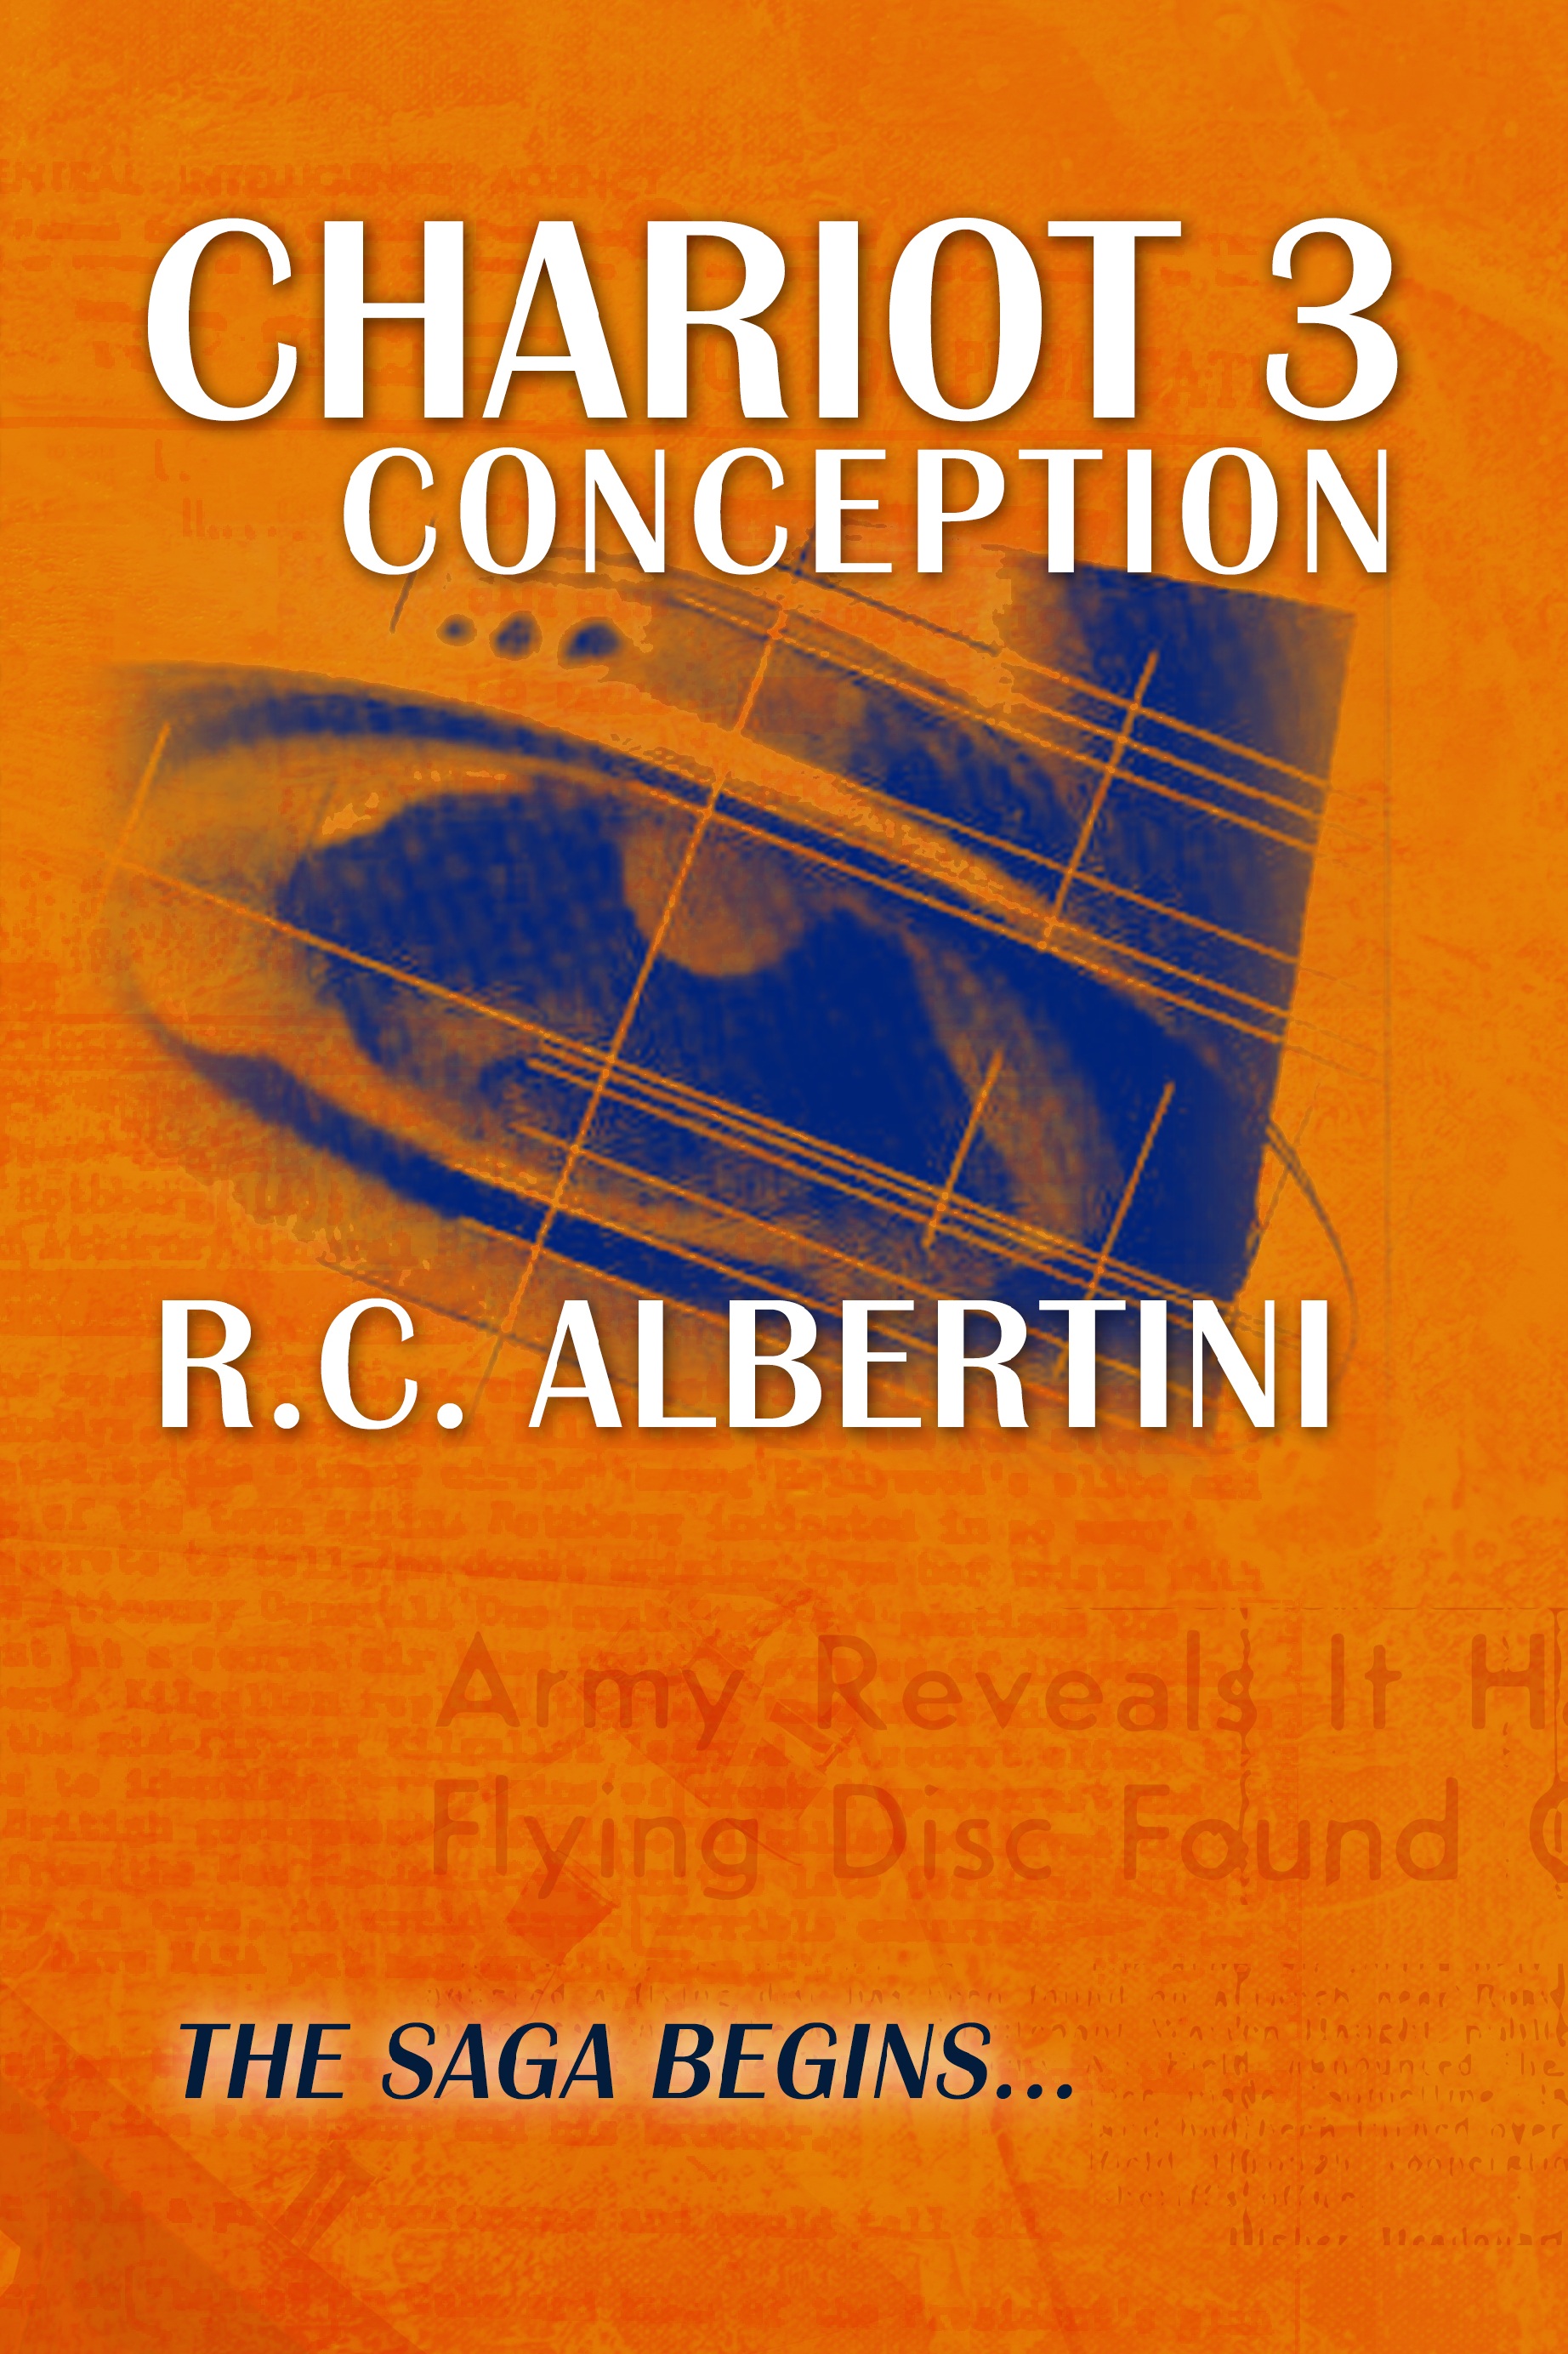 FREE: Chariot 3: Conception by R.C. Albertini